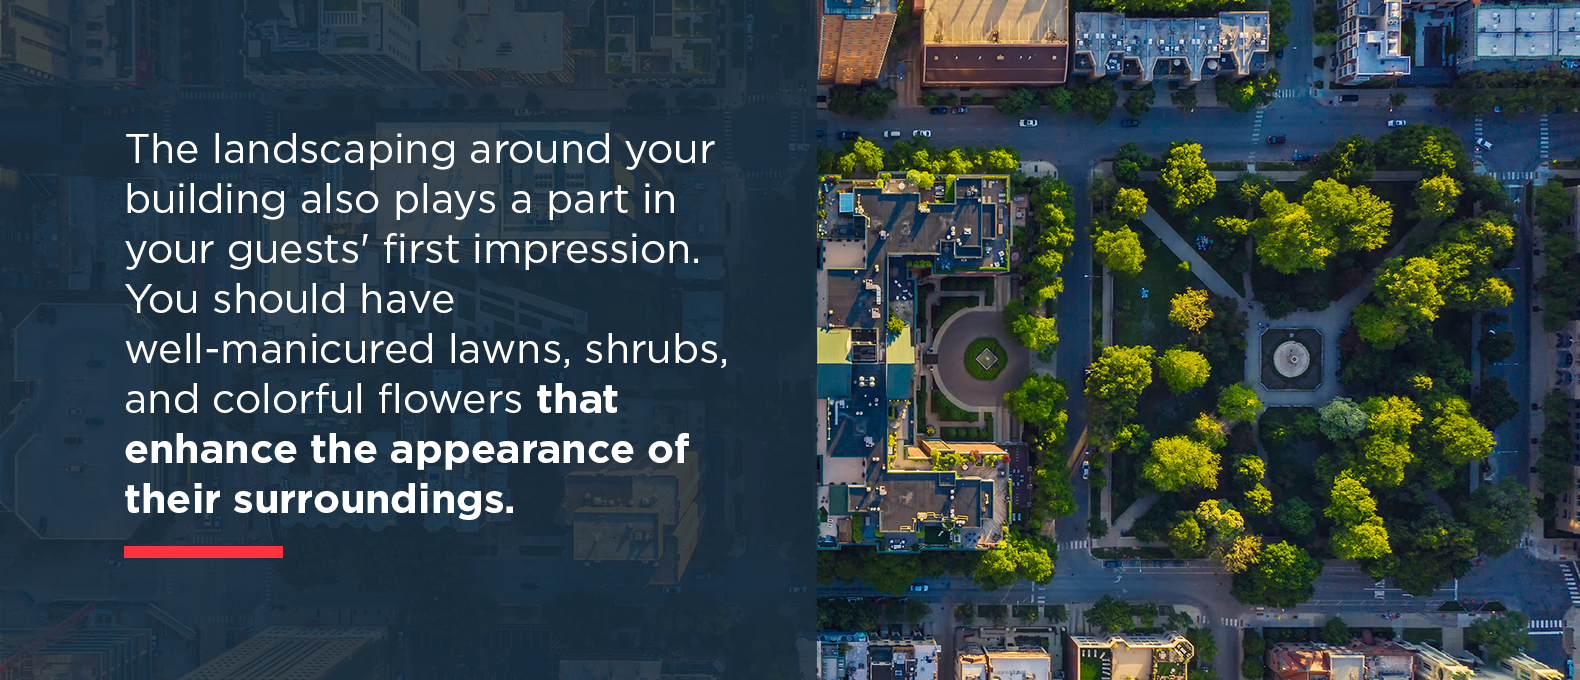 The landscaping around your building also plays a part in your guests' first impression.